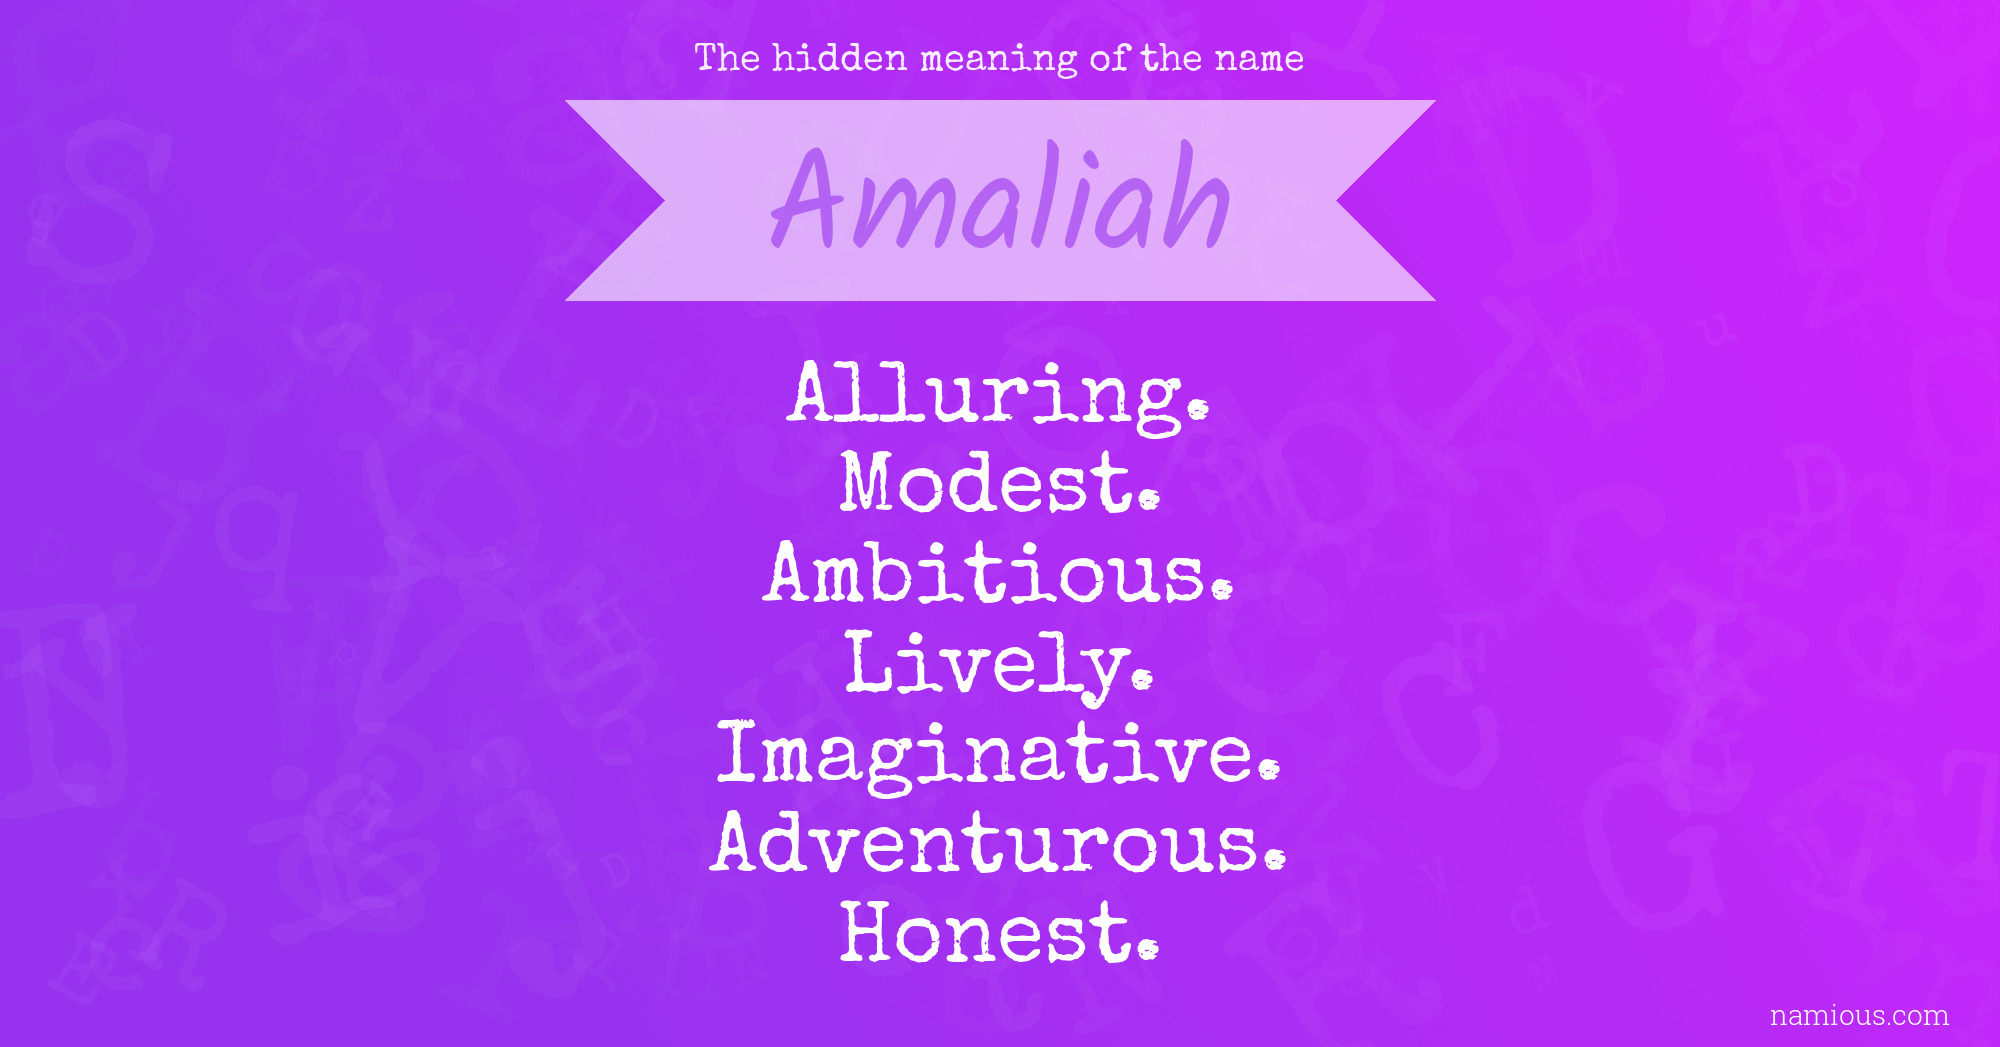 The hidden meaning of the name Amaliah